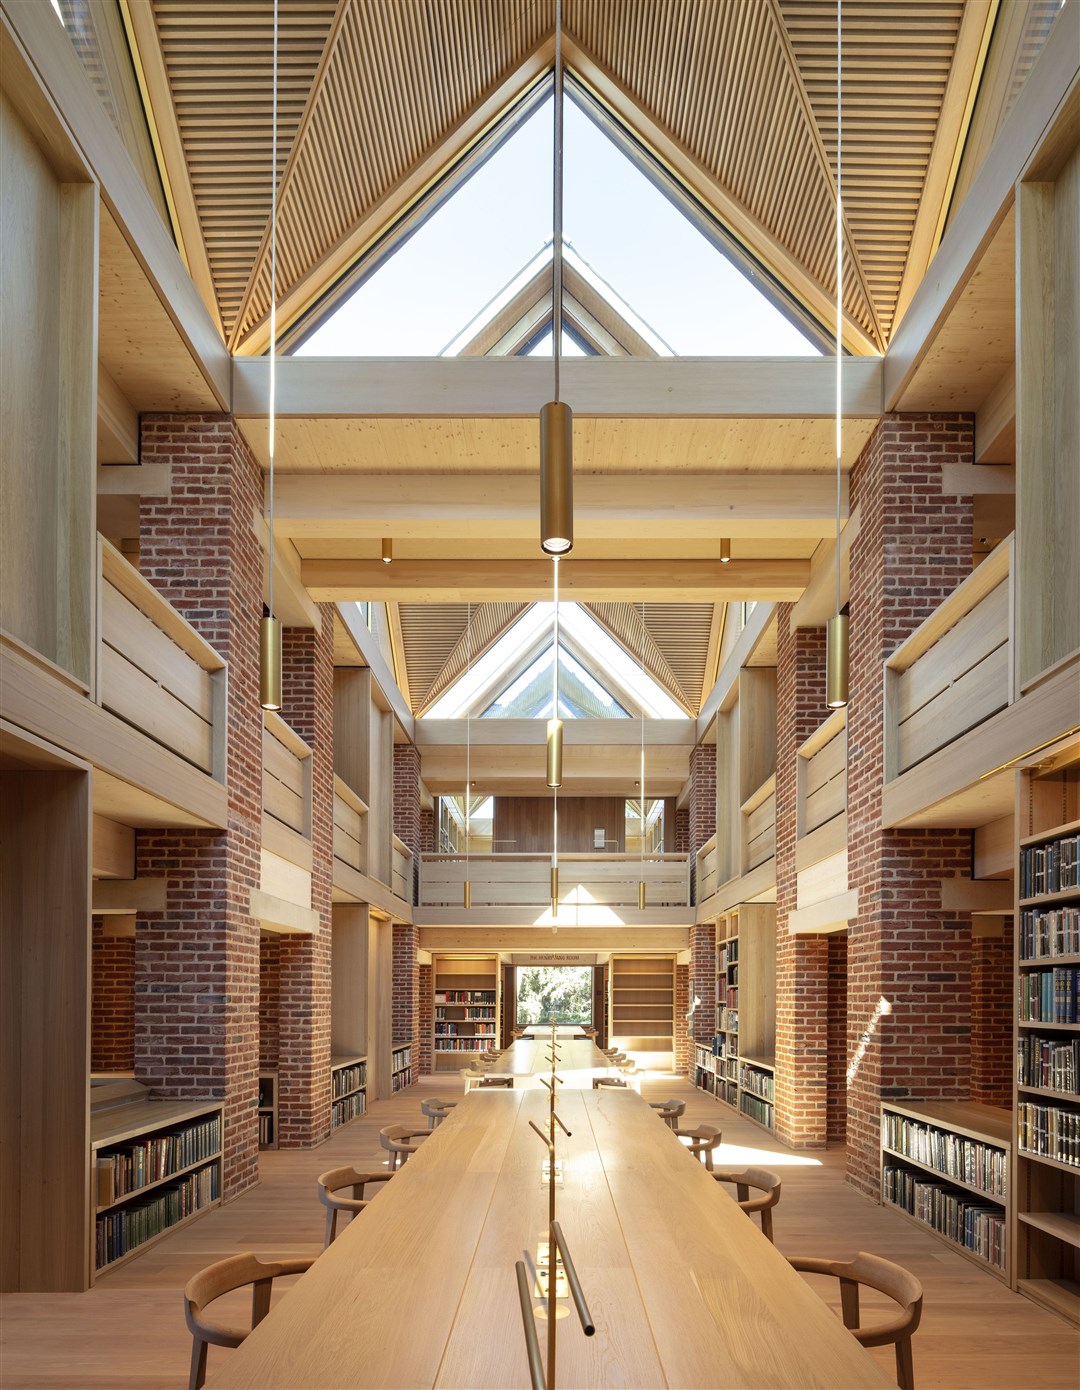 Also nominated is the The New Library, Magdalene College, in Cambridge, designed by Niall McLaughlin Architects (Nick Kane/PA)